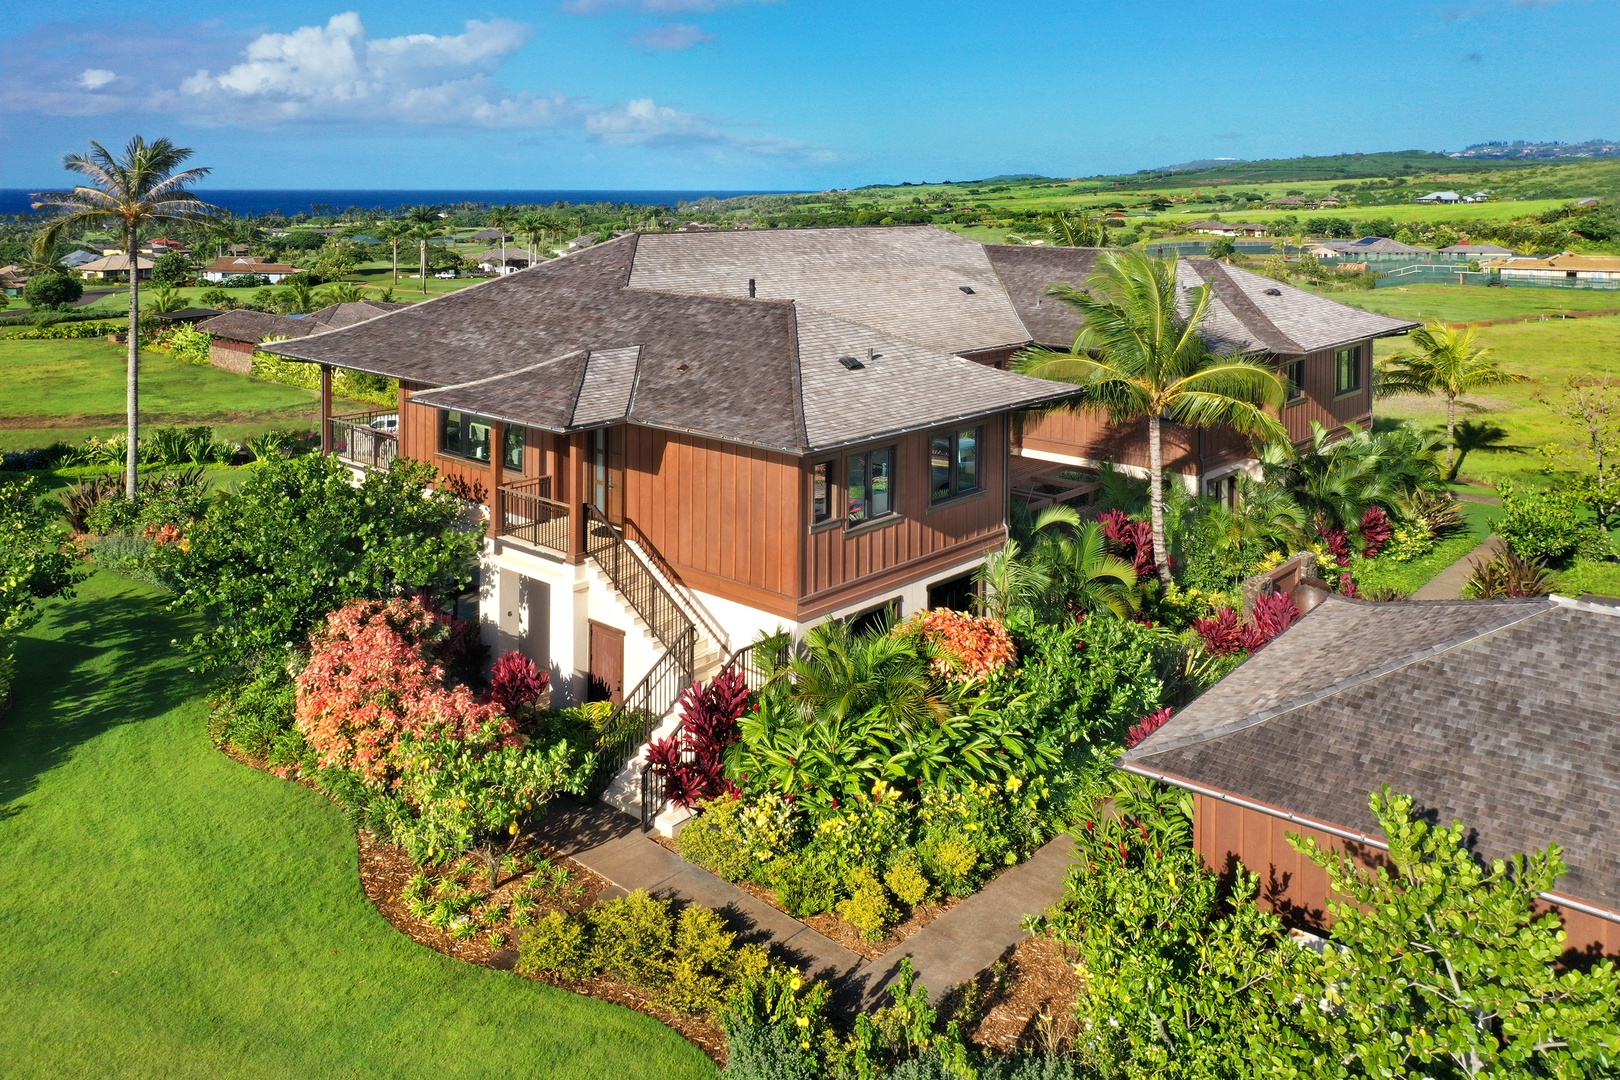 Koloa Vacation Rentals, Kukui'ula Villa #8 - Ideally situated within walking distance of the Shops at Kukuiula, Second-level Kainani Villa #8 features air conditioning, high ceilings, an open floor plan, and elegant finishes, creating an extraordinary setting for your Hawaiian getaway